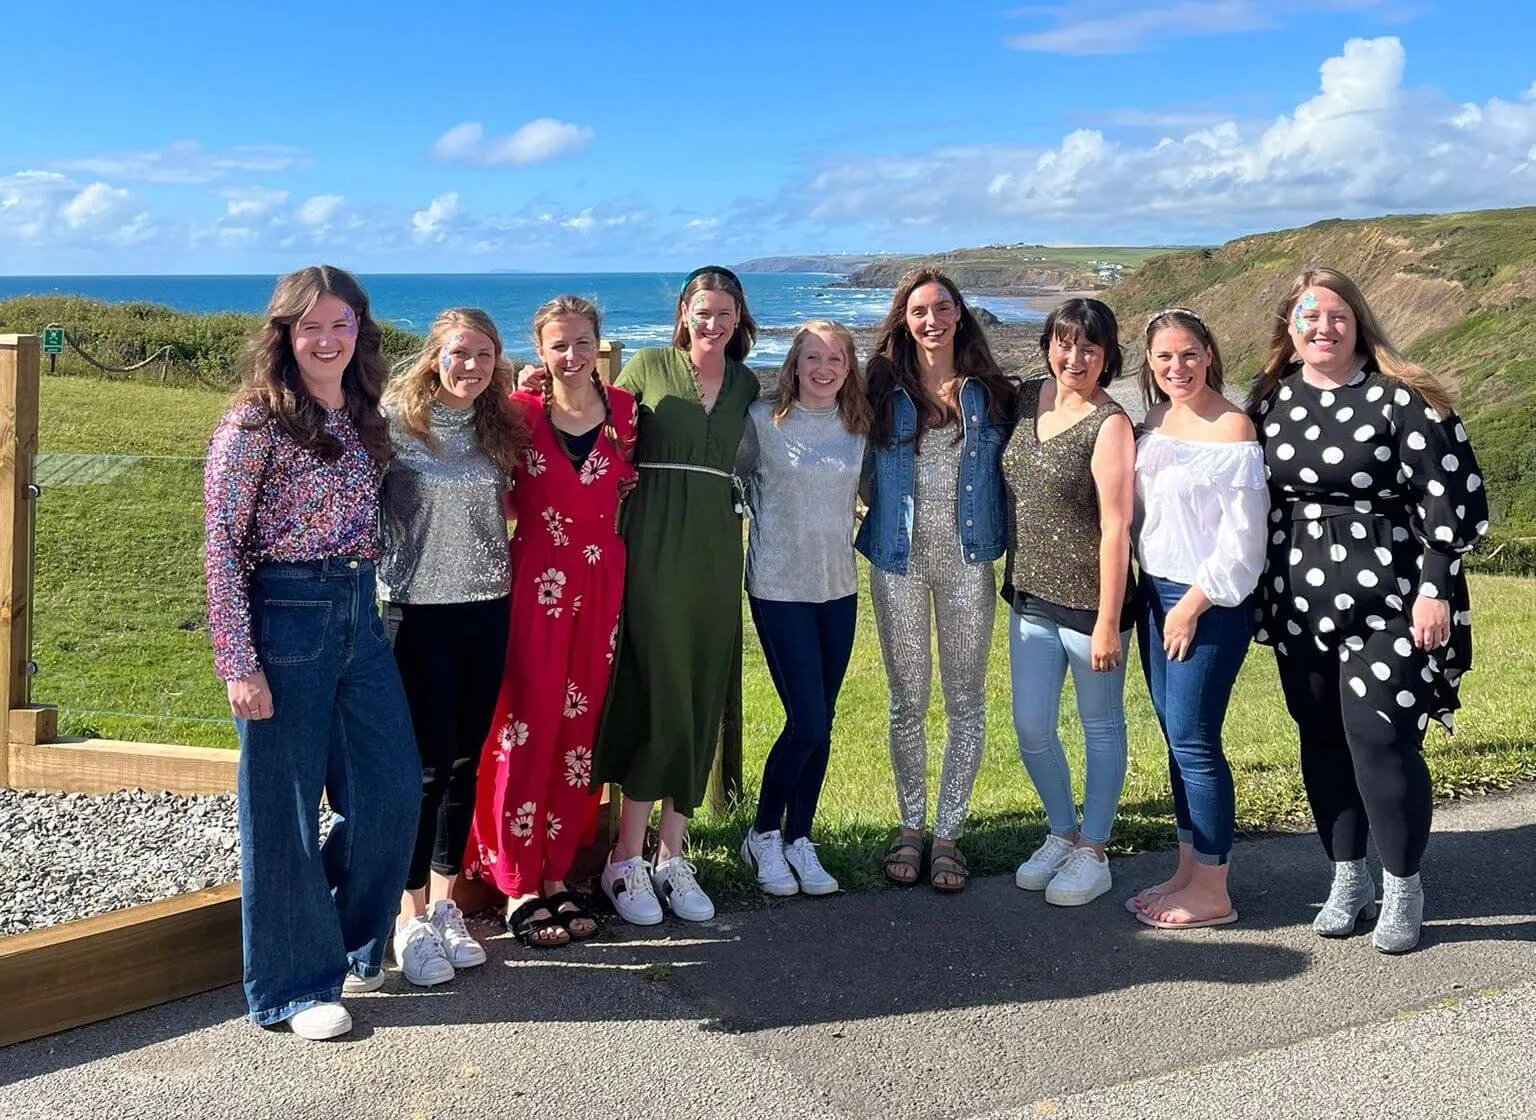 Hen do with the epic sea view in the background